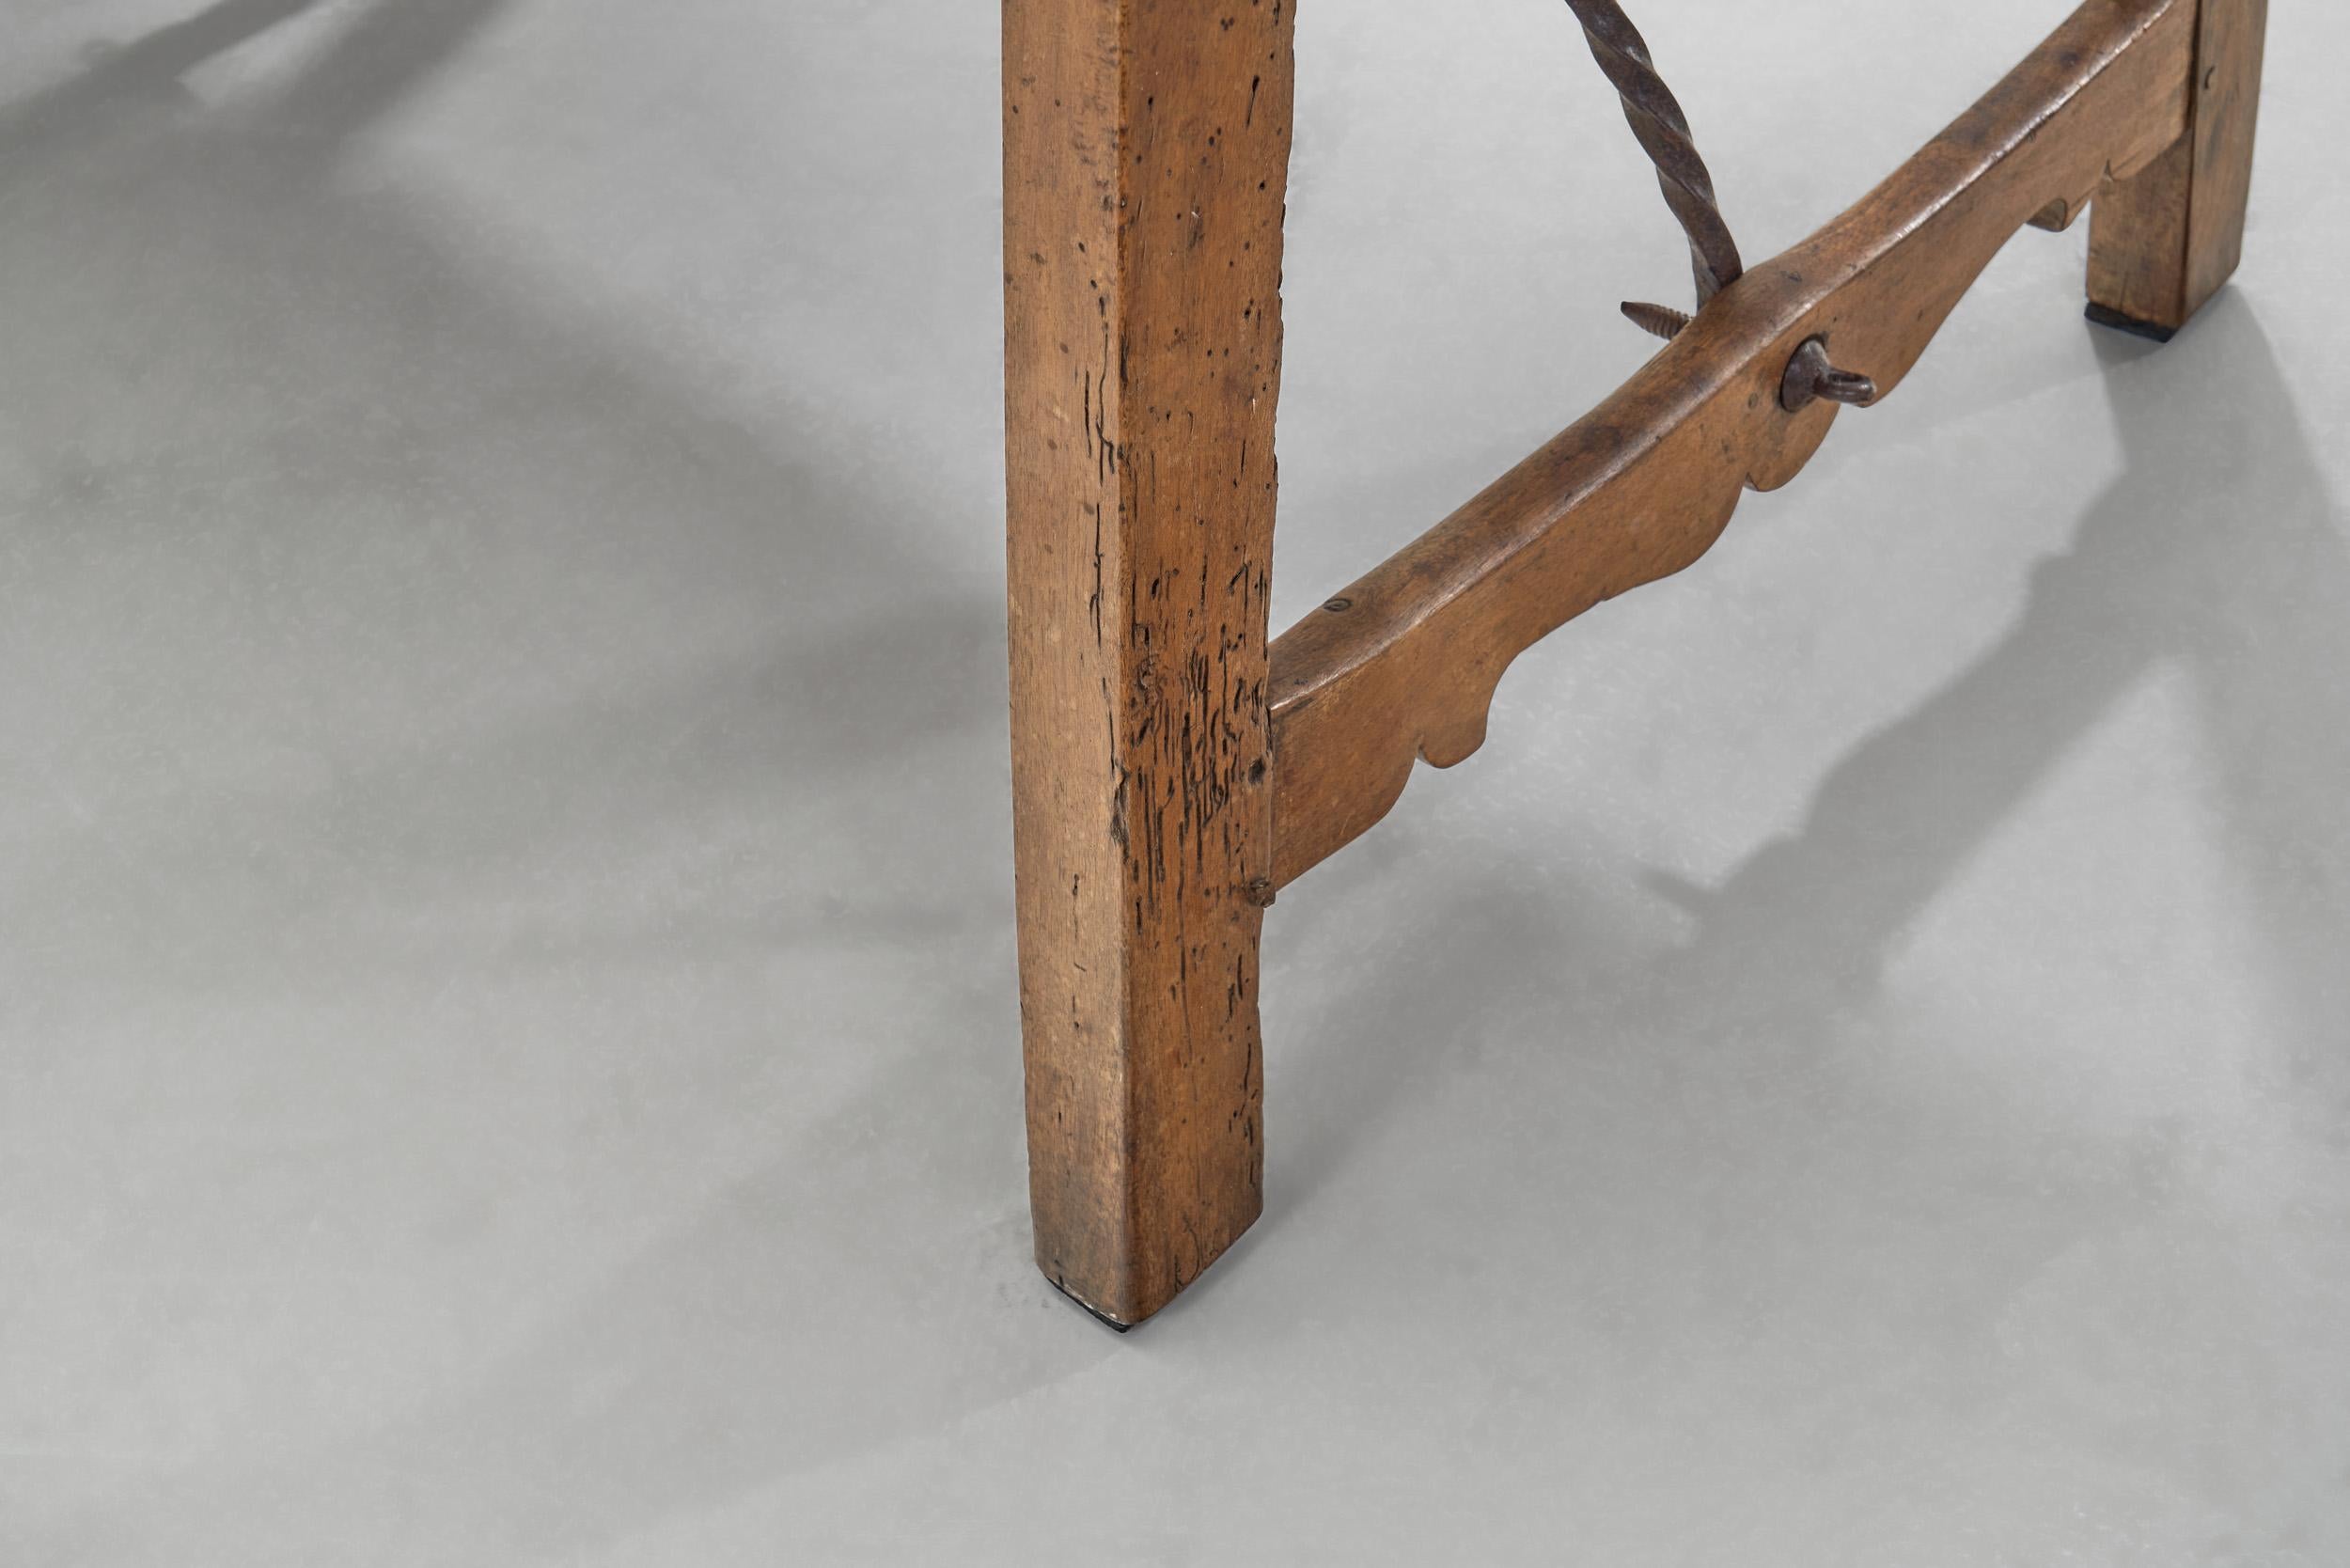 Spanish Walnut and Wrought Iron Table, Spain late 18th century For Sale 12